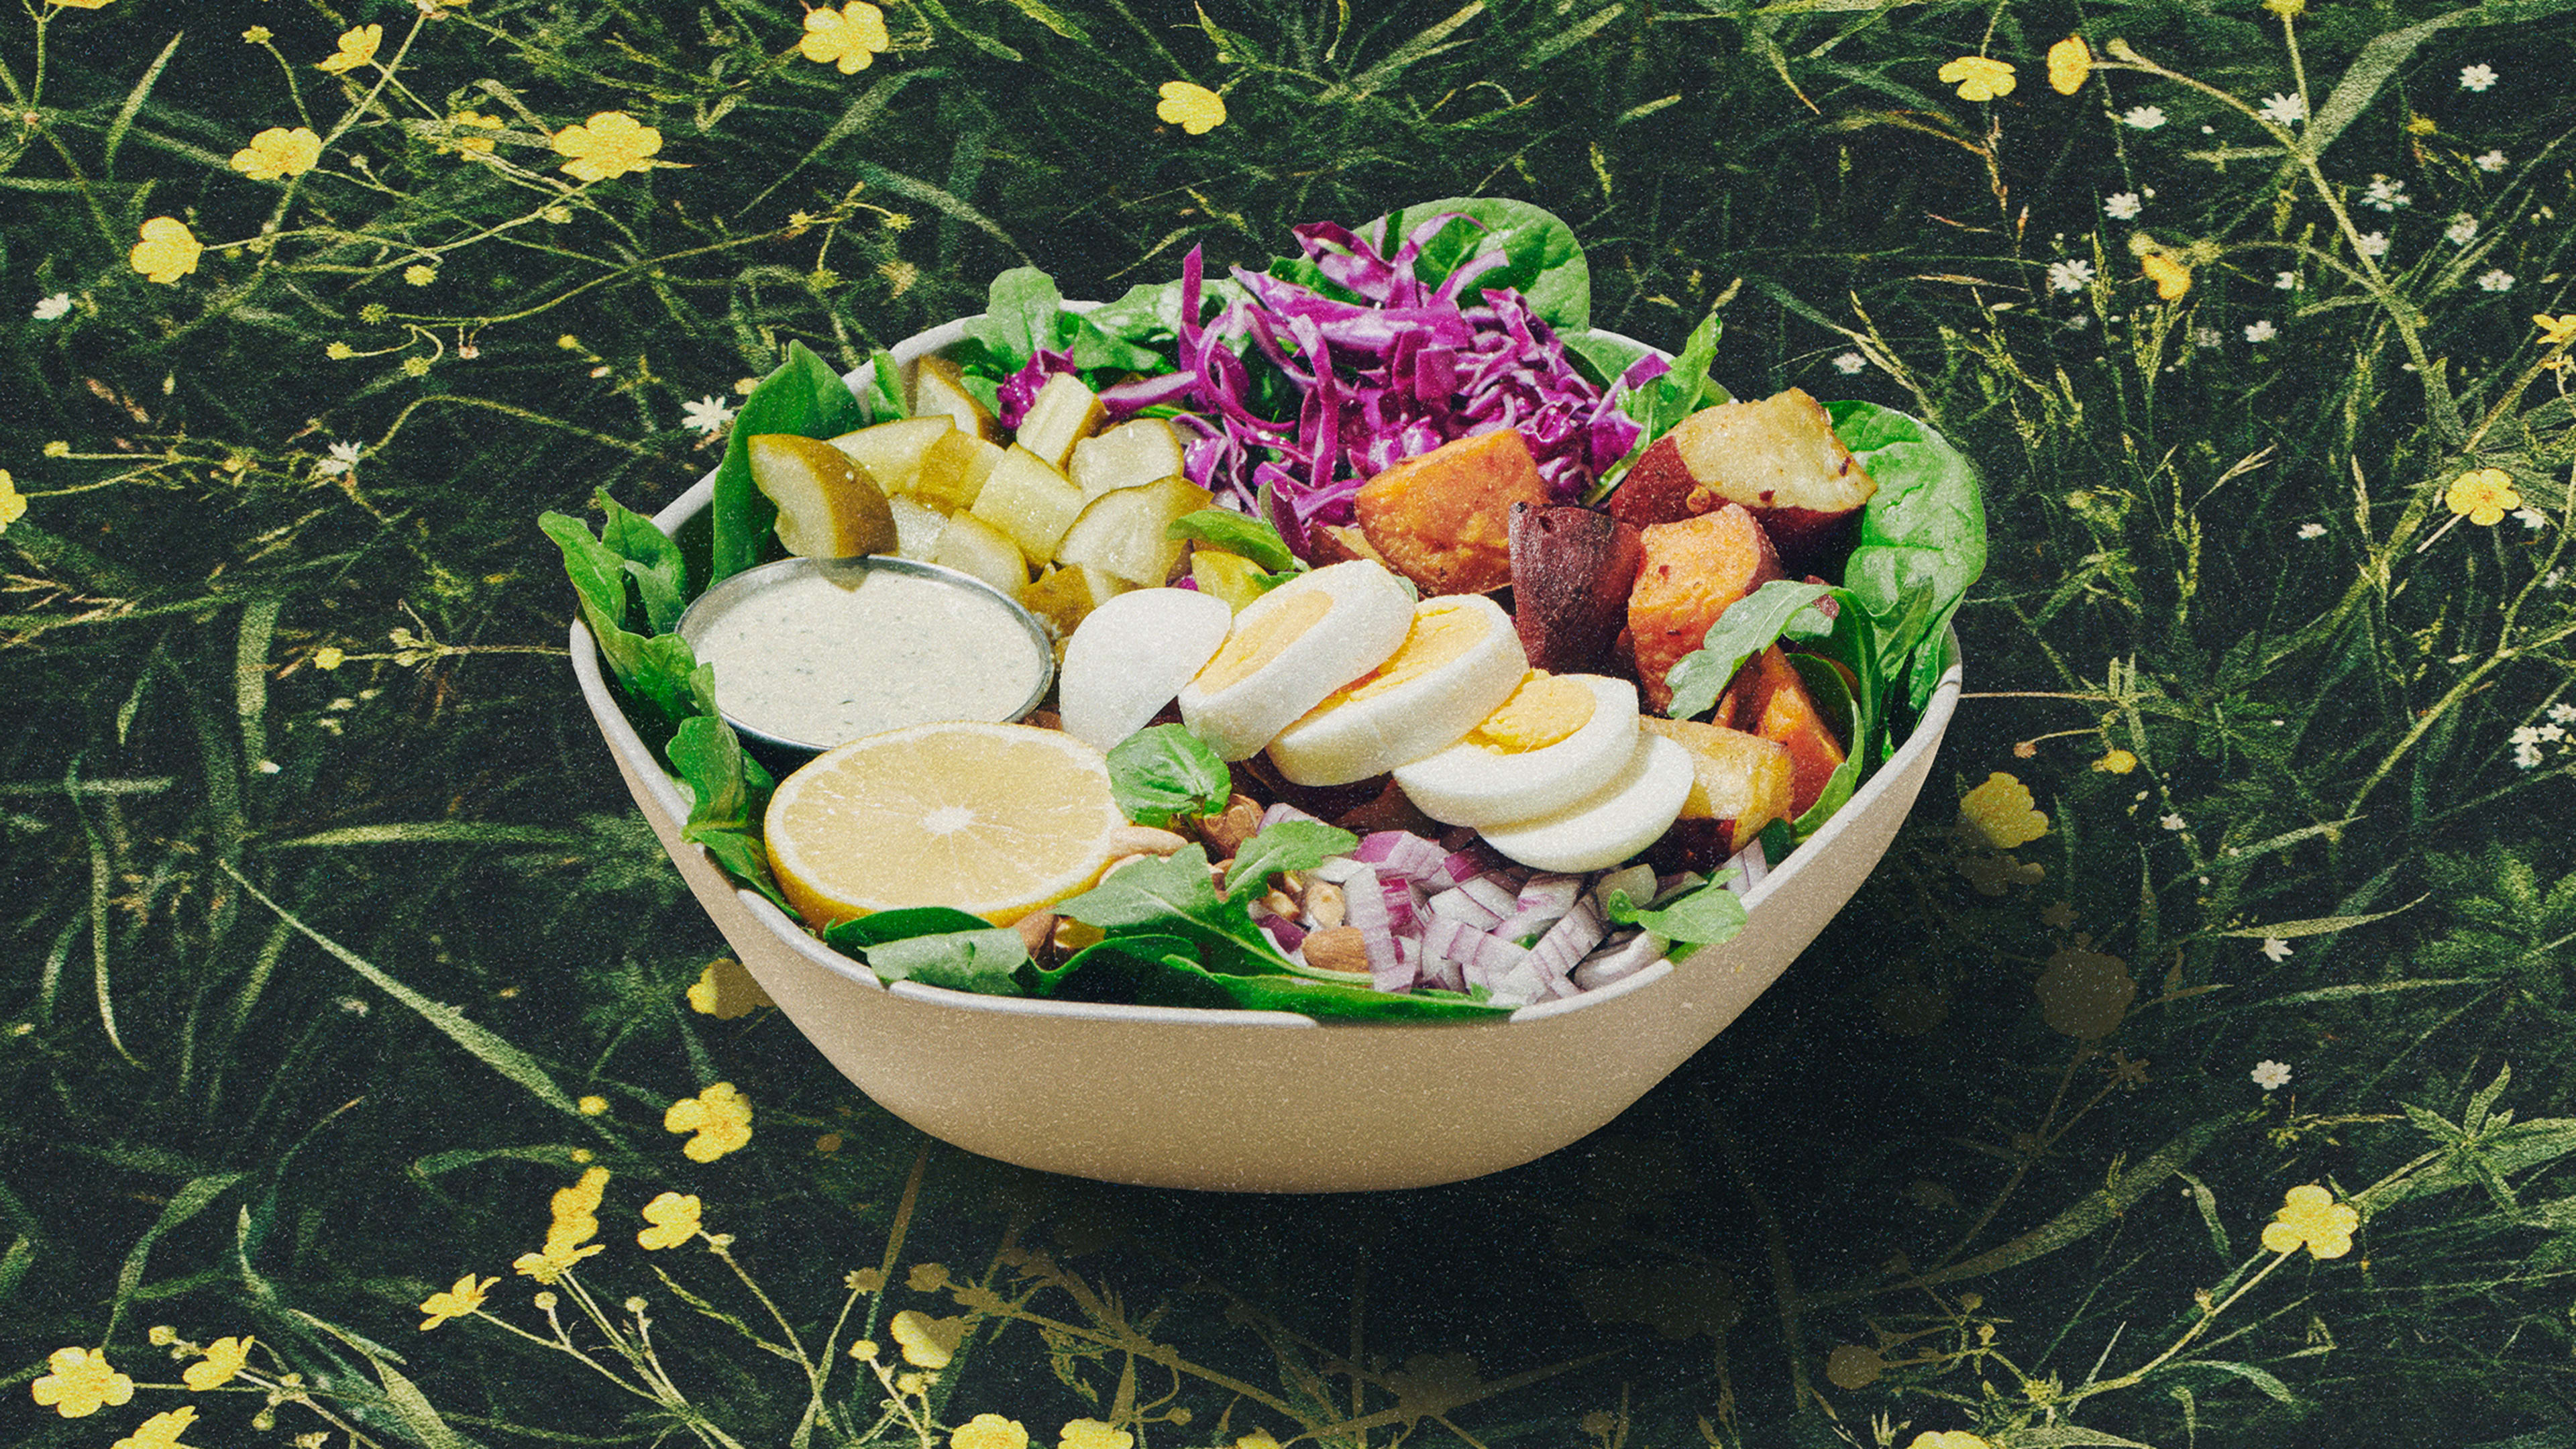 How Sweetgreen plans to cut its carbon footprint in half in the next 6 years